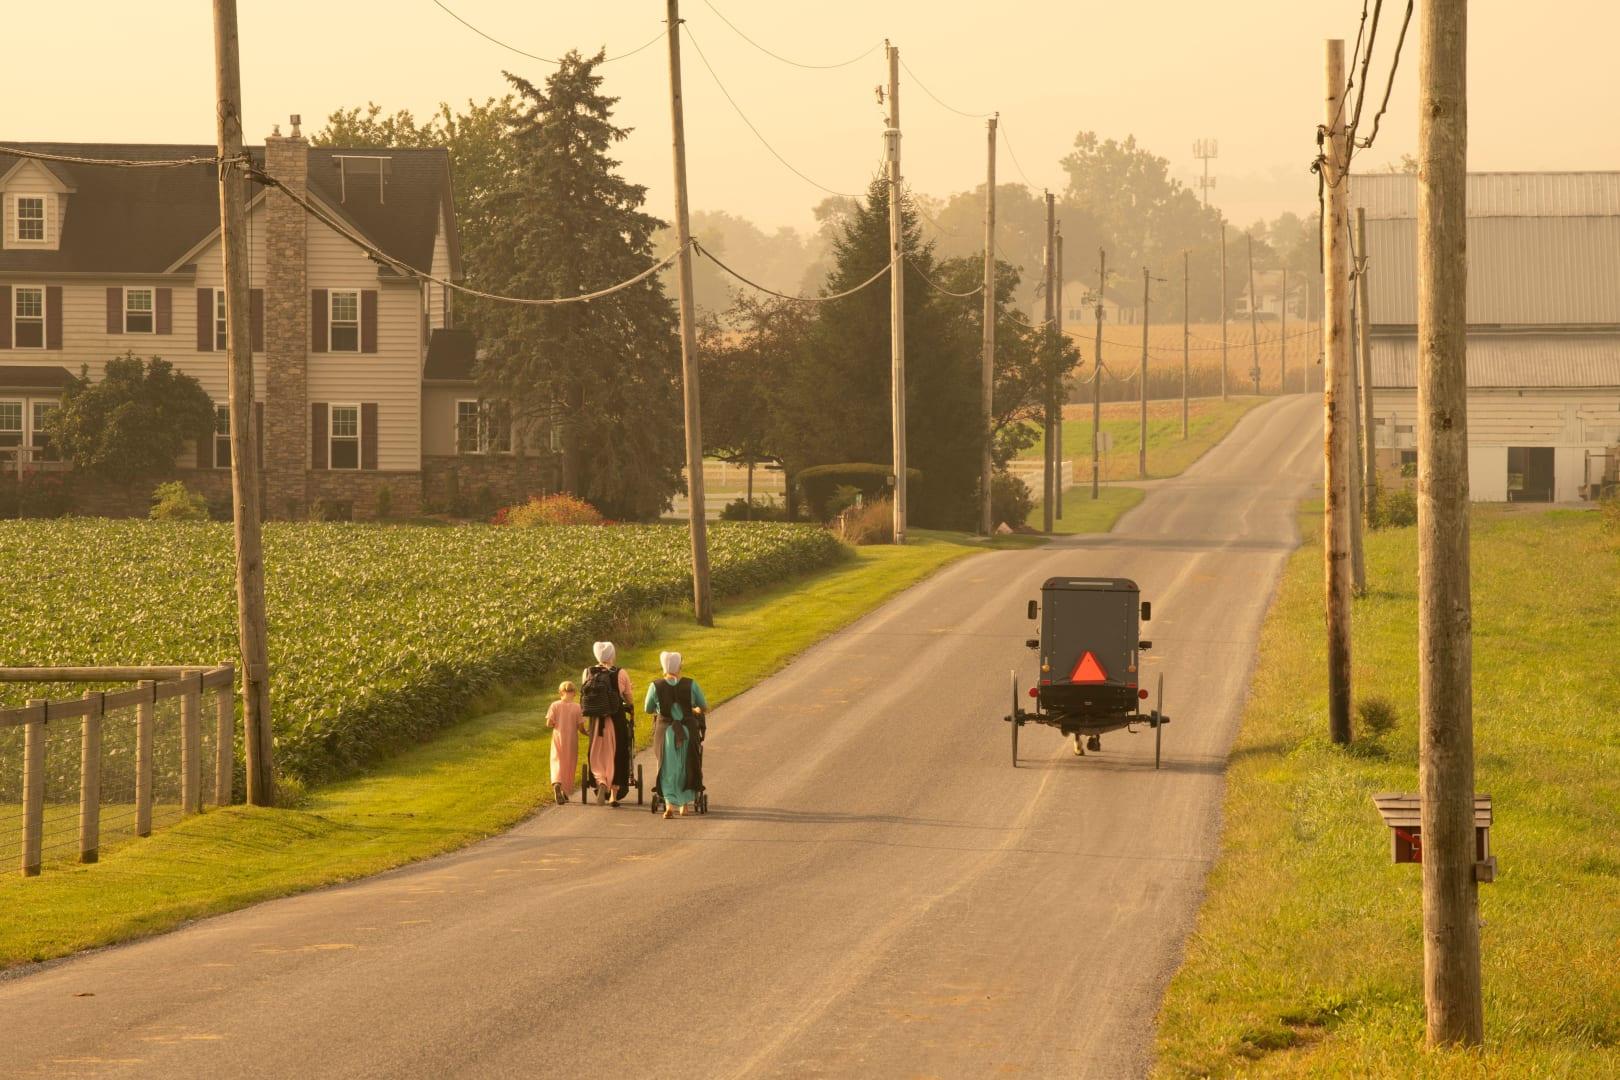 Amish farmer faces fines, prison time for refusing to comply with USDA regulations